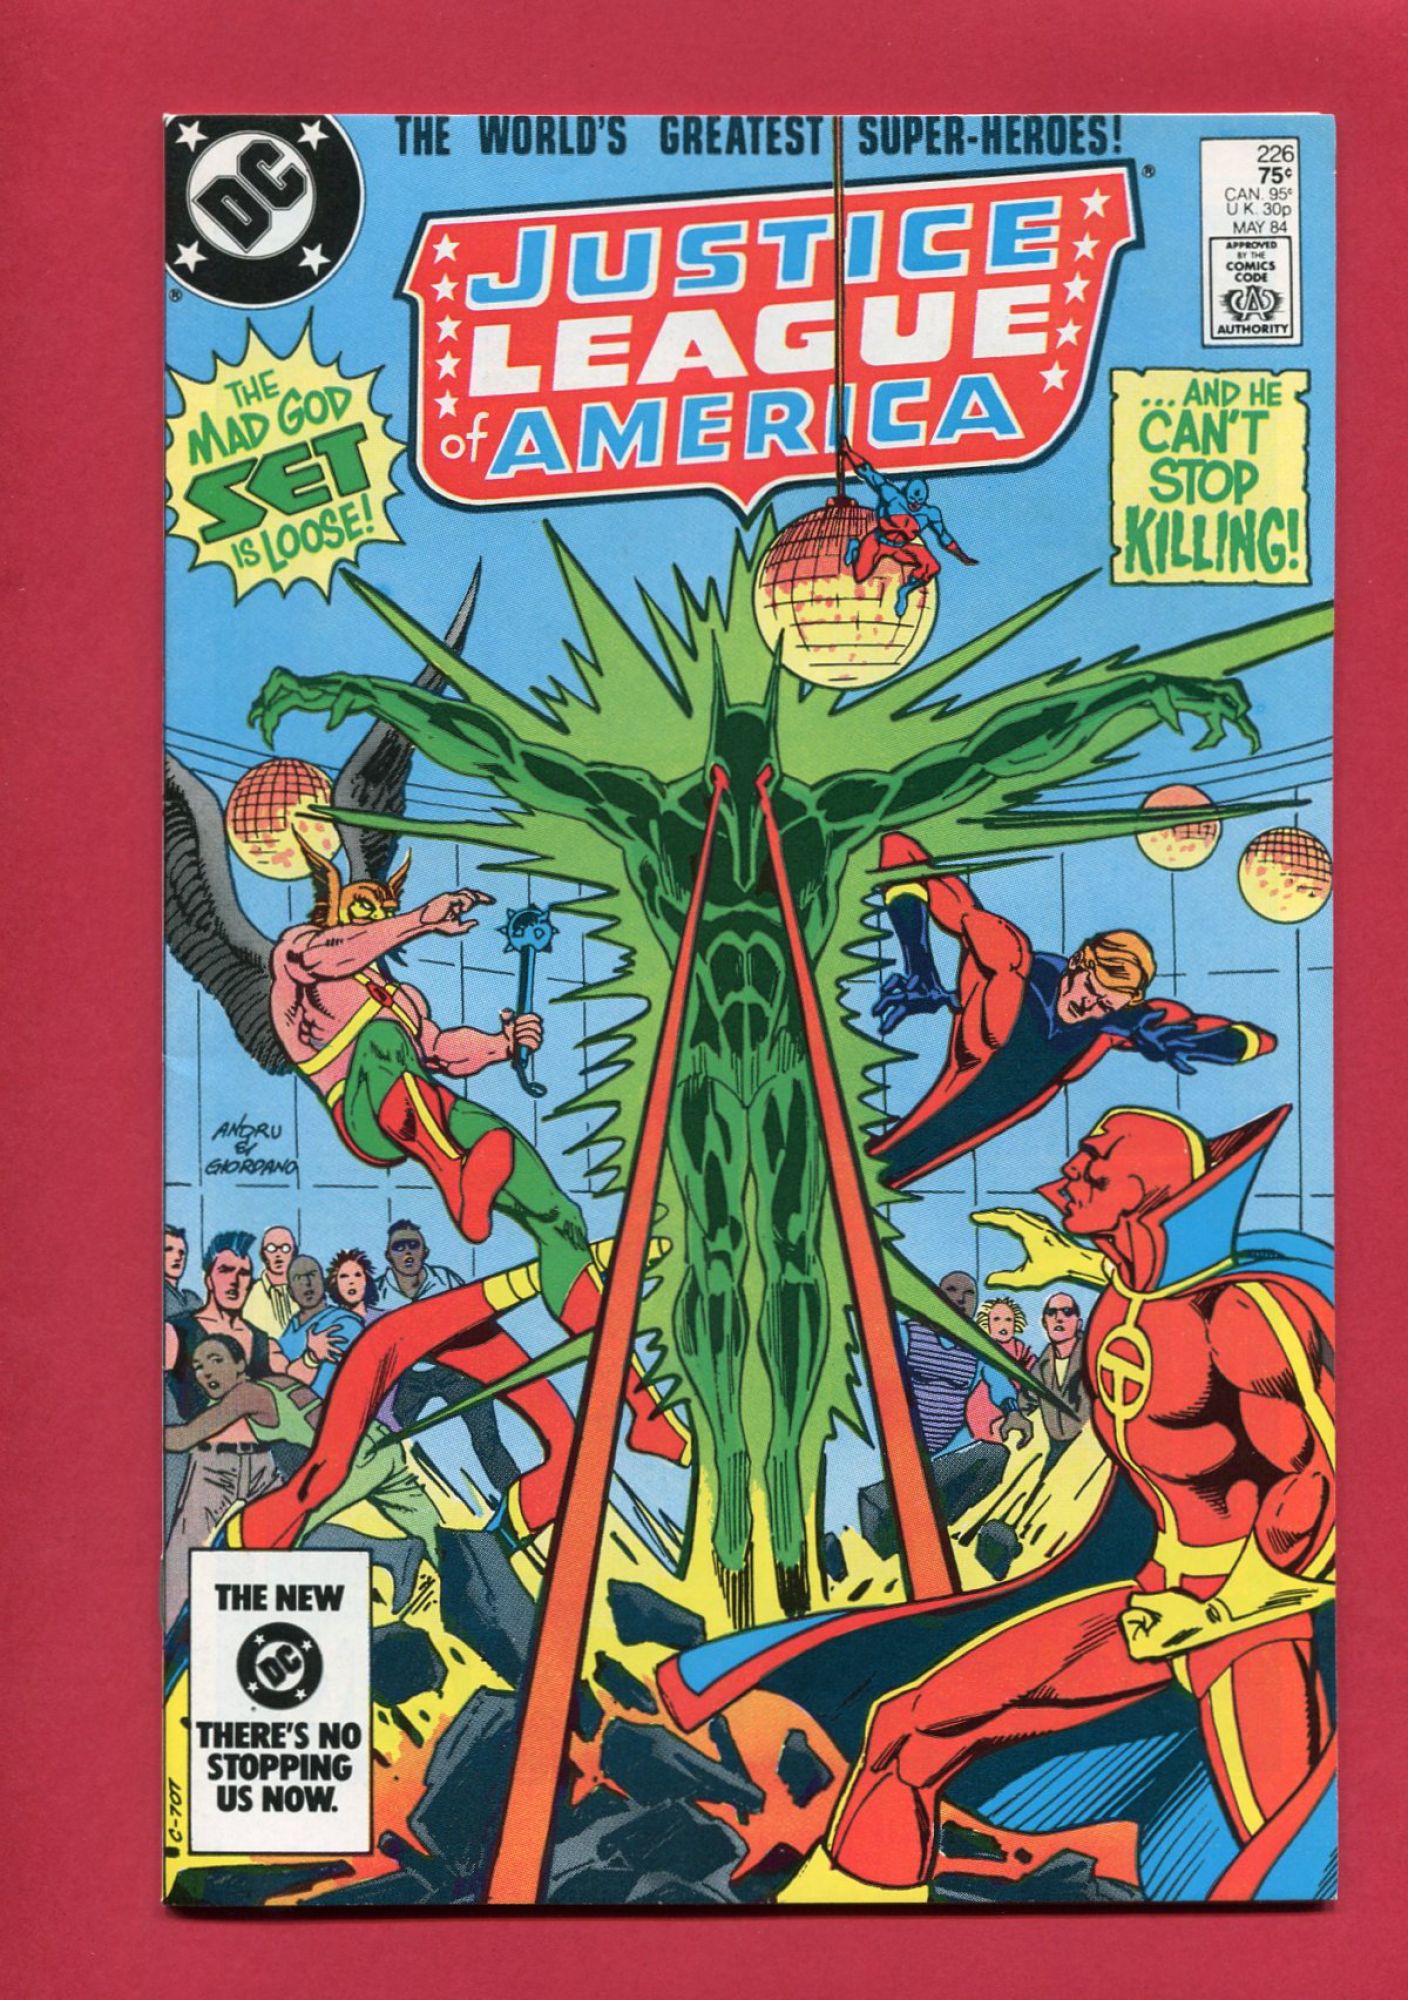 Justice League of America (Volume 1 1960) #226, May 1984, 9.2 NM-